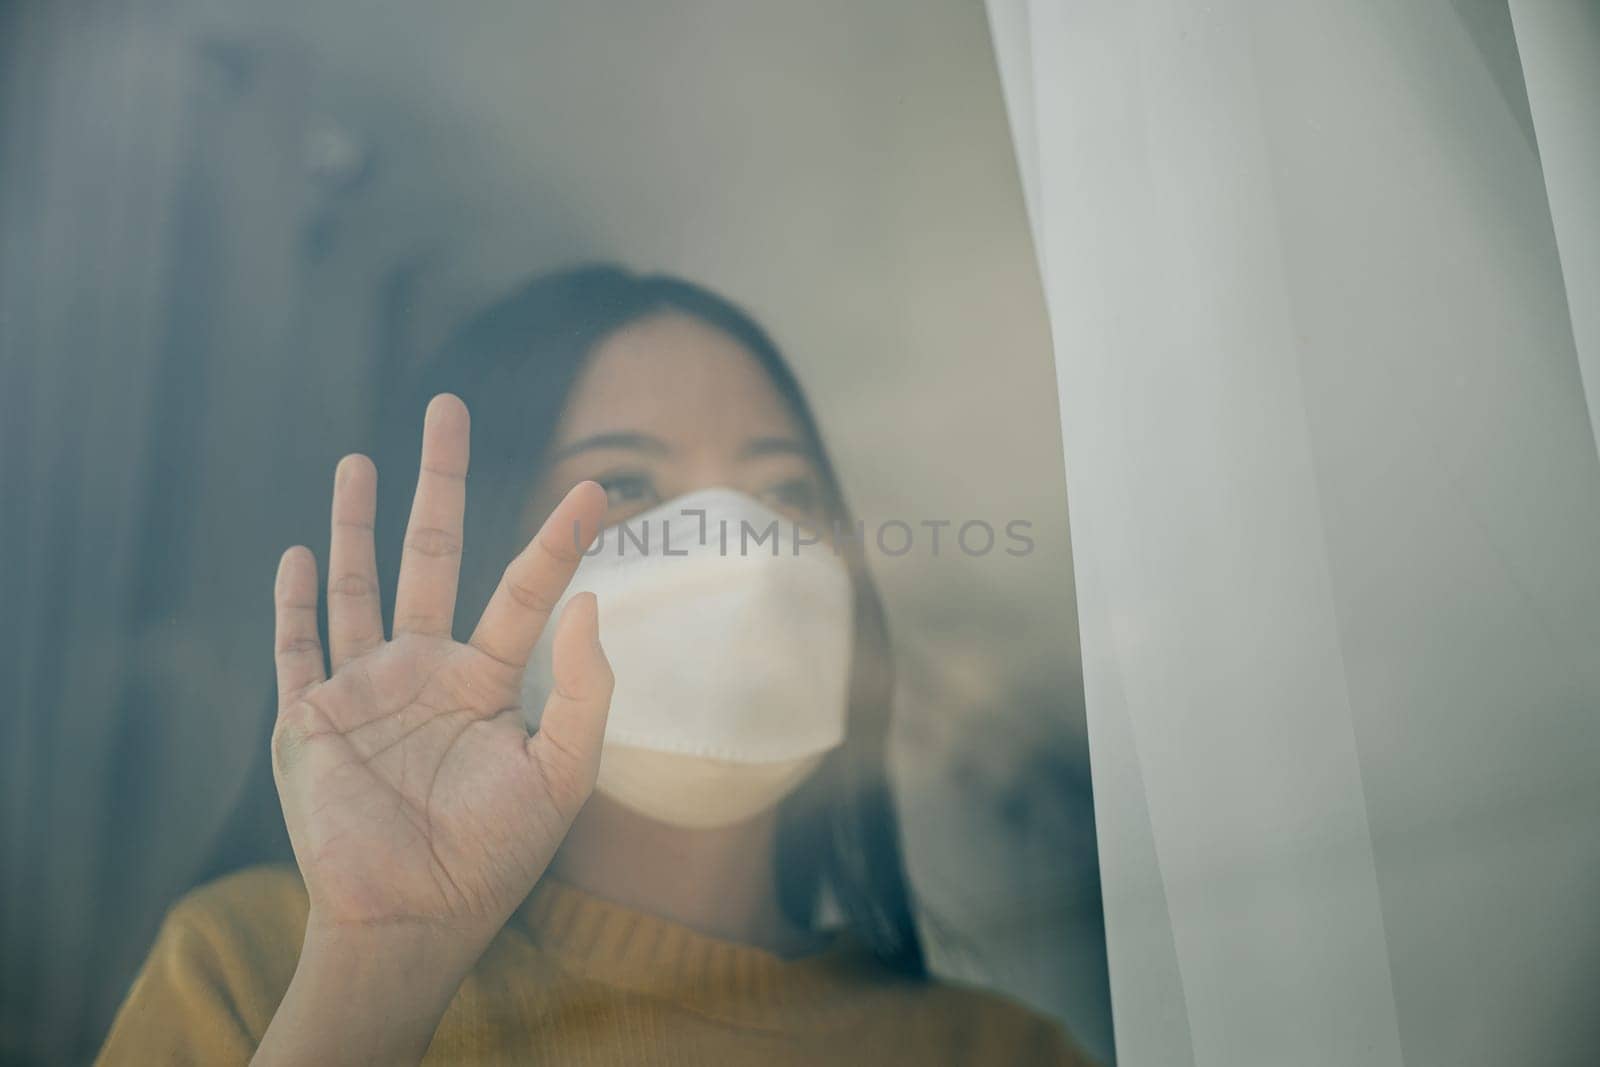 Woman in a medical mask practices isolation at home emphasizing COVID-19 prevention during the outbreak by Sorapop